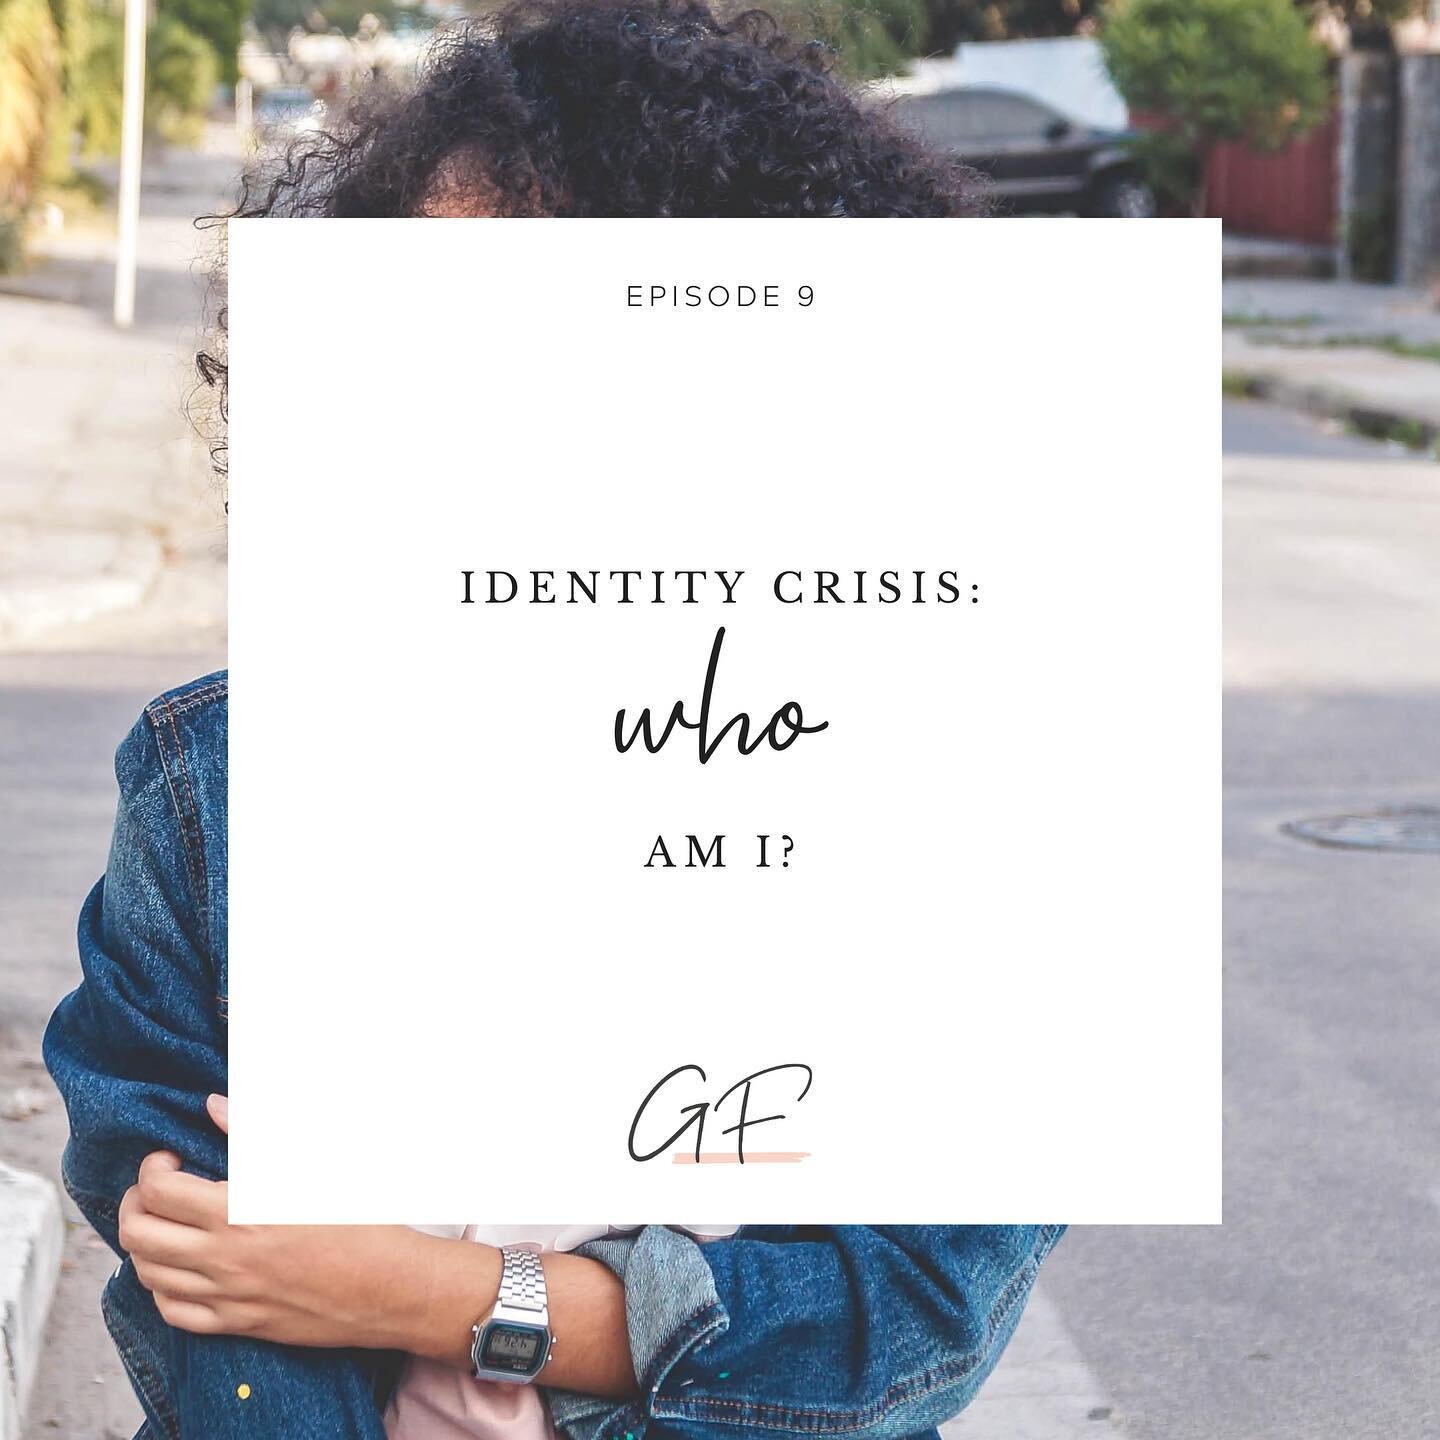 NEW EPISODE ALERT 📢 Have you ever wondered &ldquo;who am I?&rdquo; 

Chances are at one point or another you&rsquo;ve questioned who you are and why you&rsquo;re here. In this Episode, @garimeacham and @carladellafemina talk about identity crisis, s